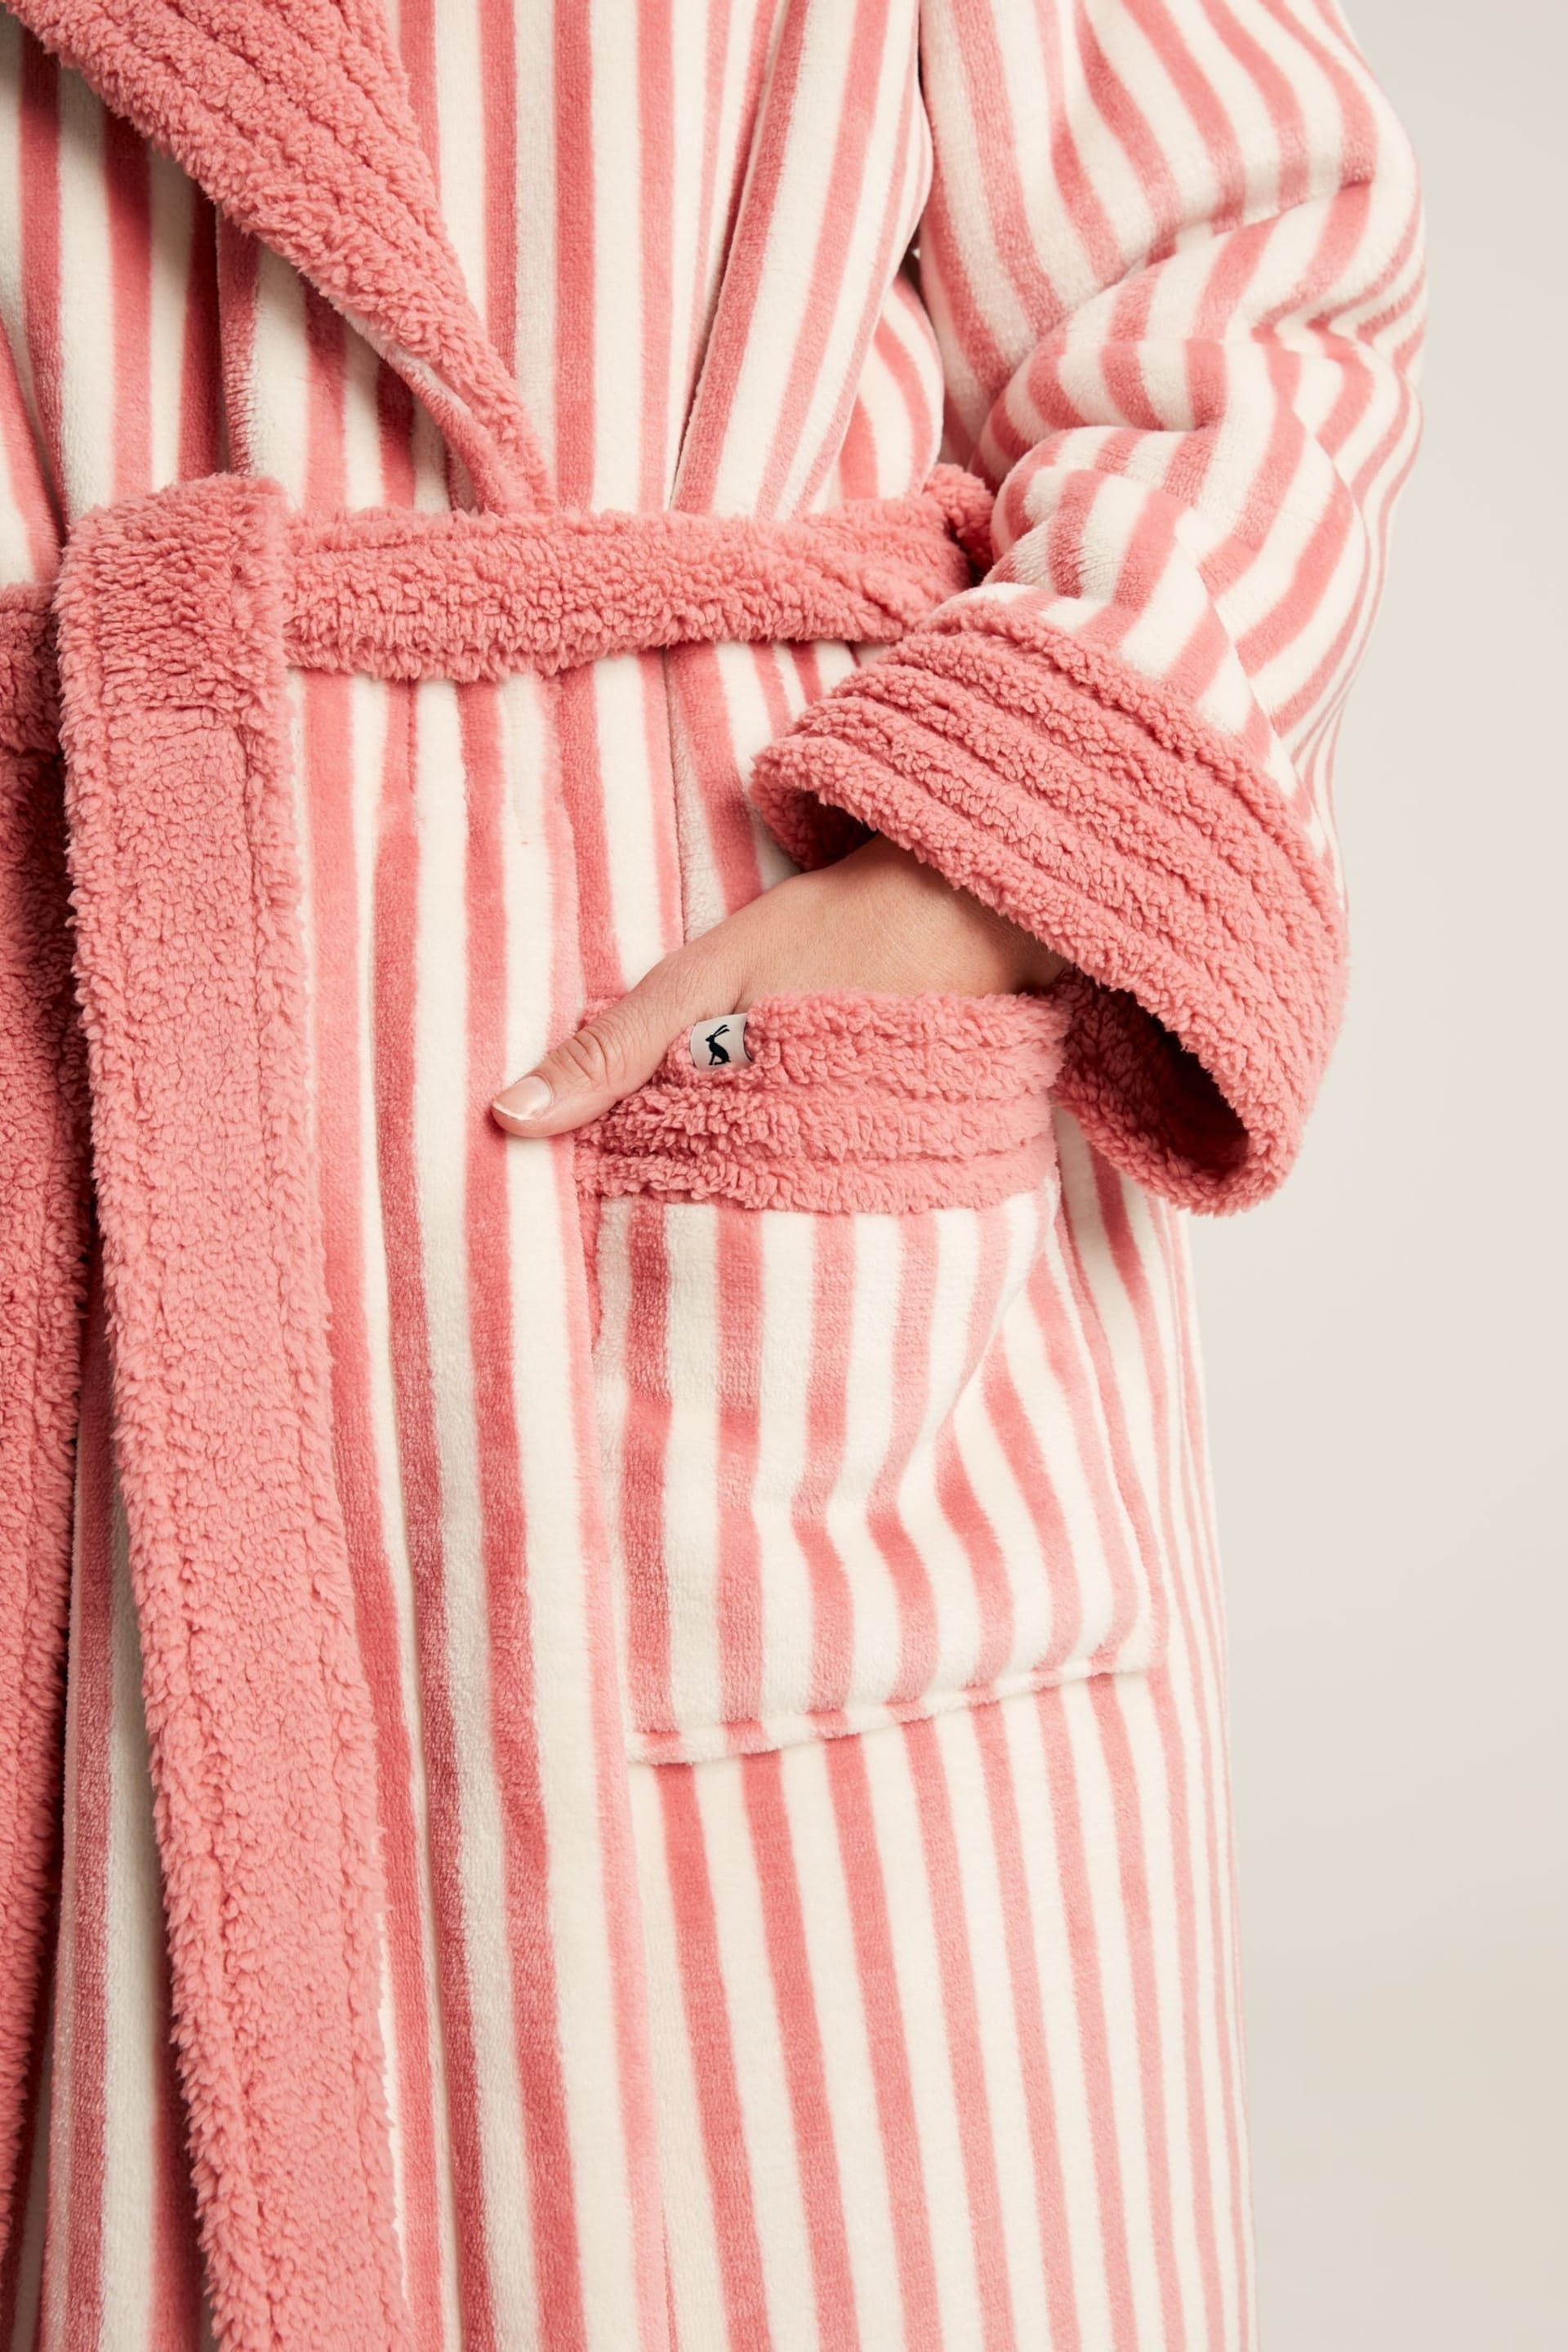 Joules Matilda Pink Fleece Lined Striped Dressing Gown - Image 5 of 6